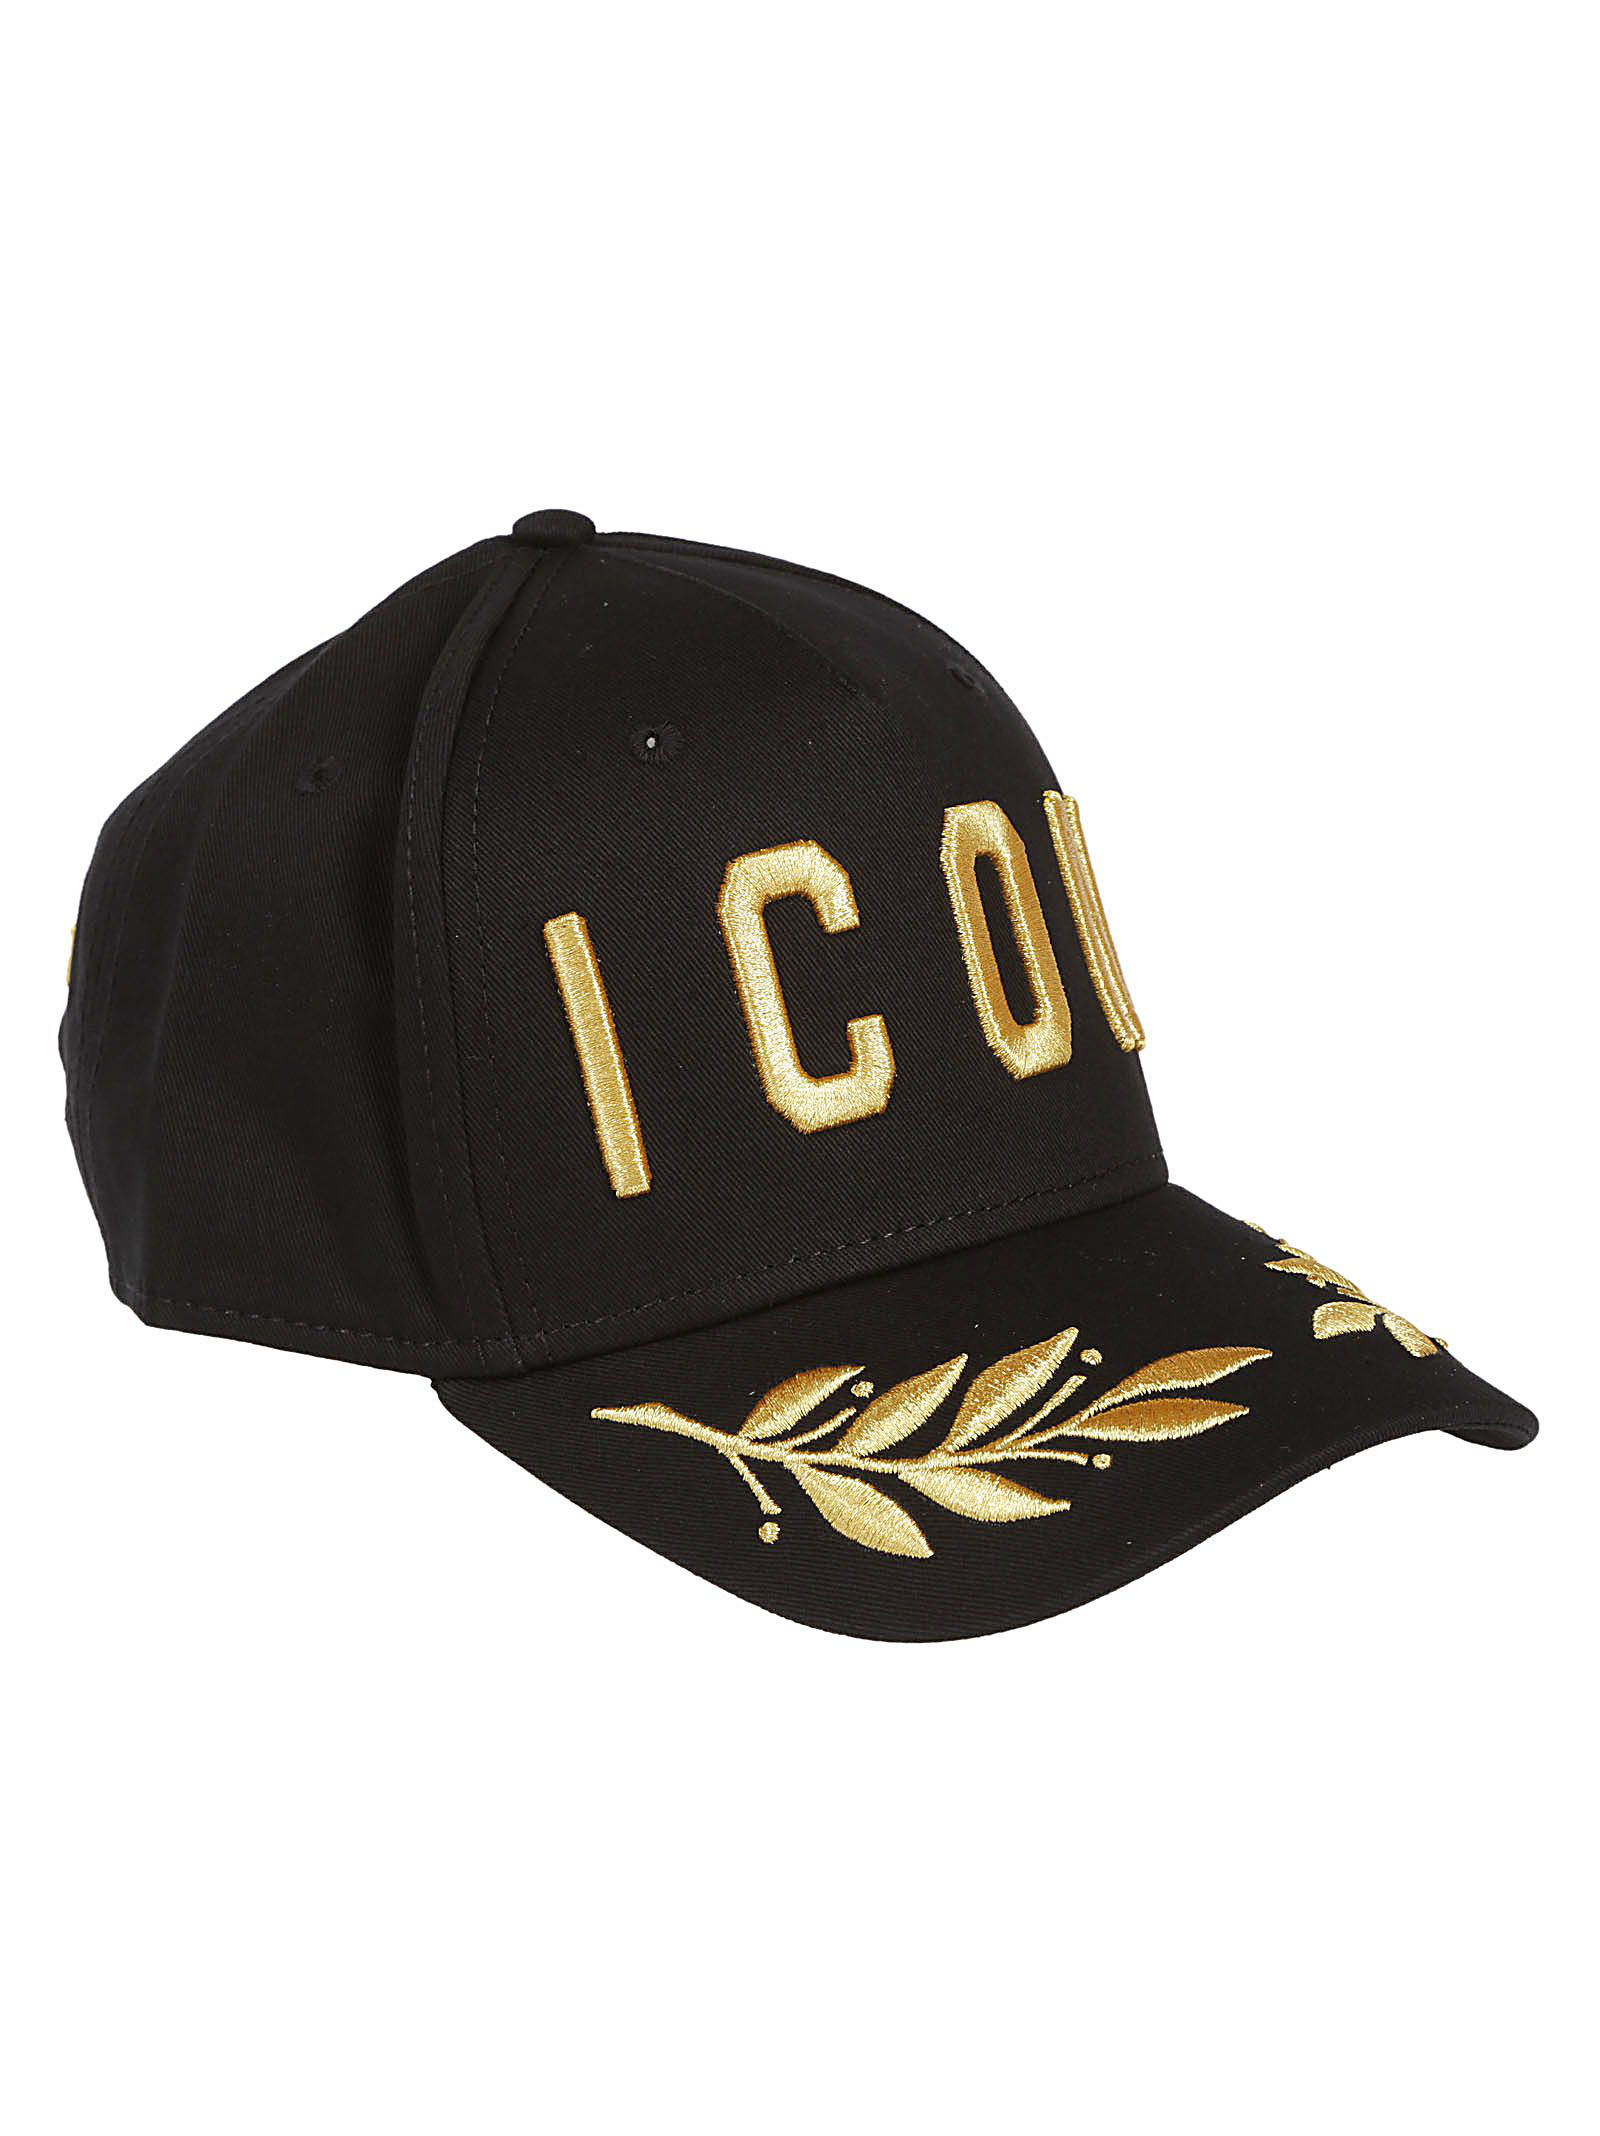 dsquared icon cap black and gold